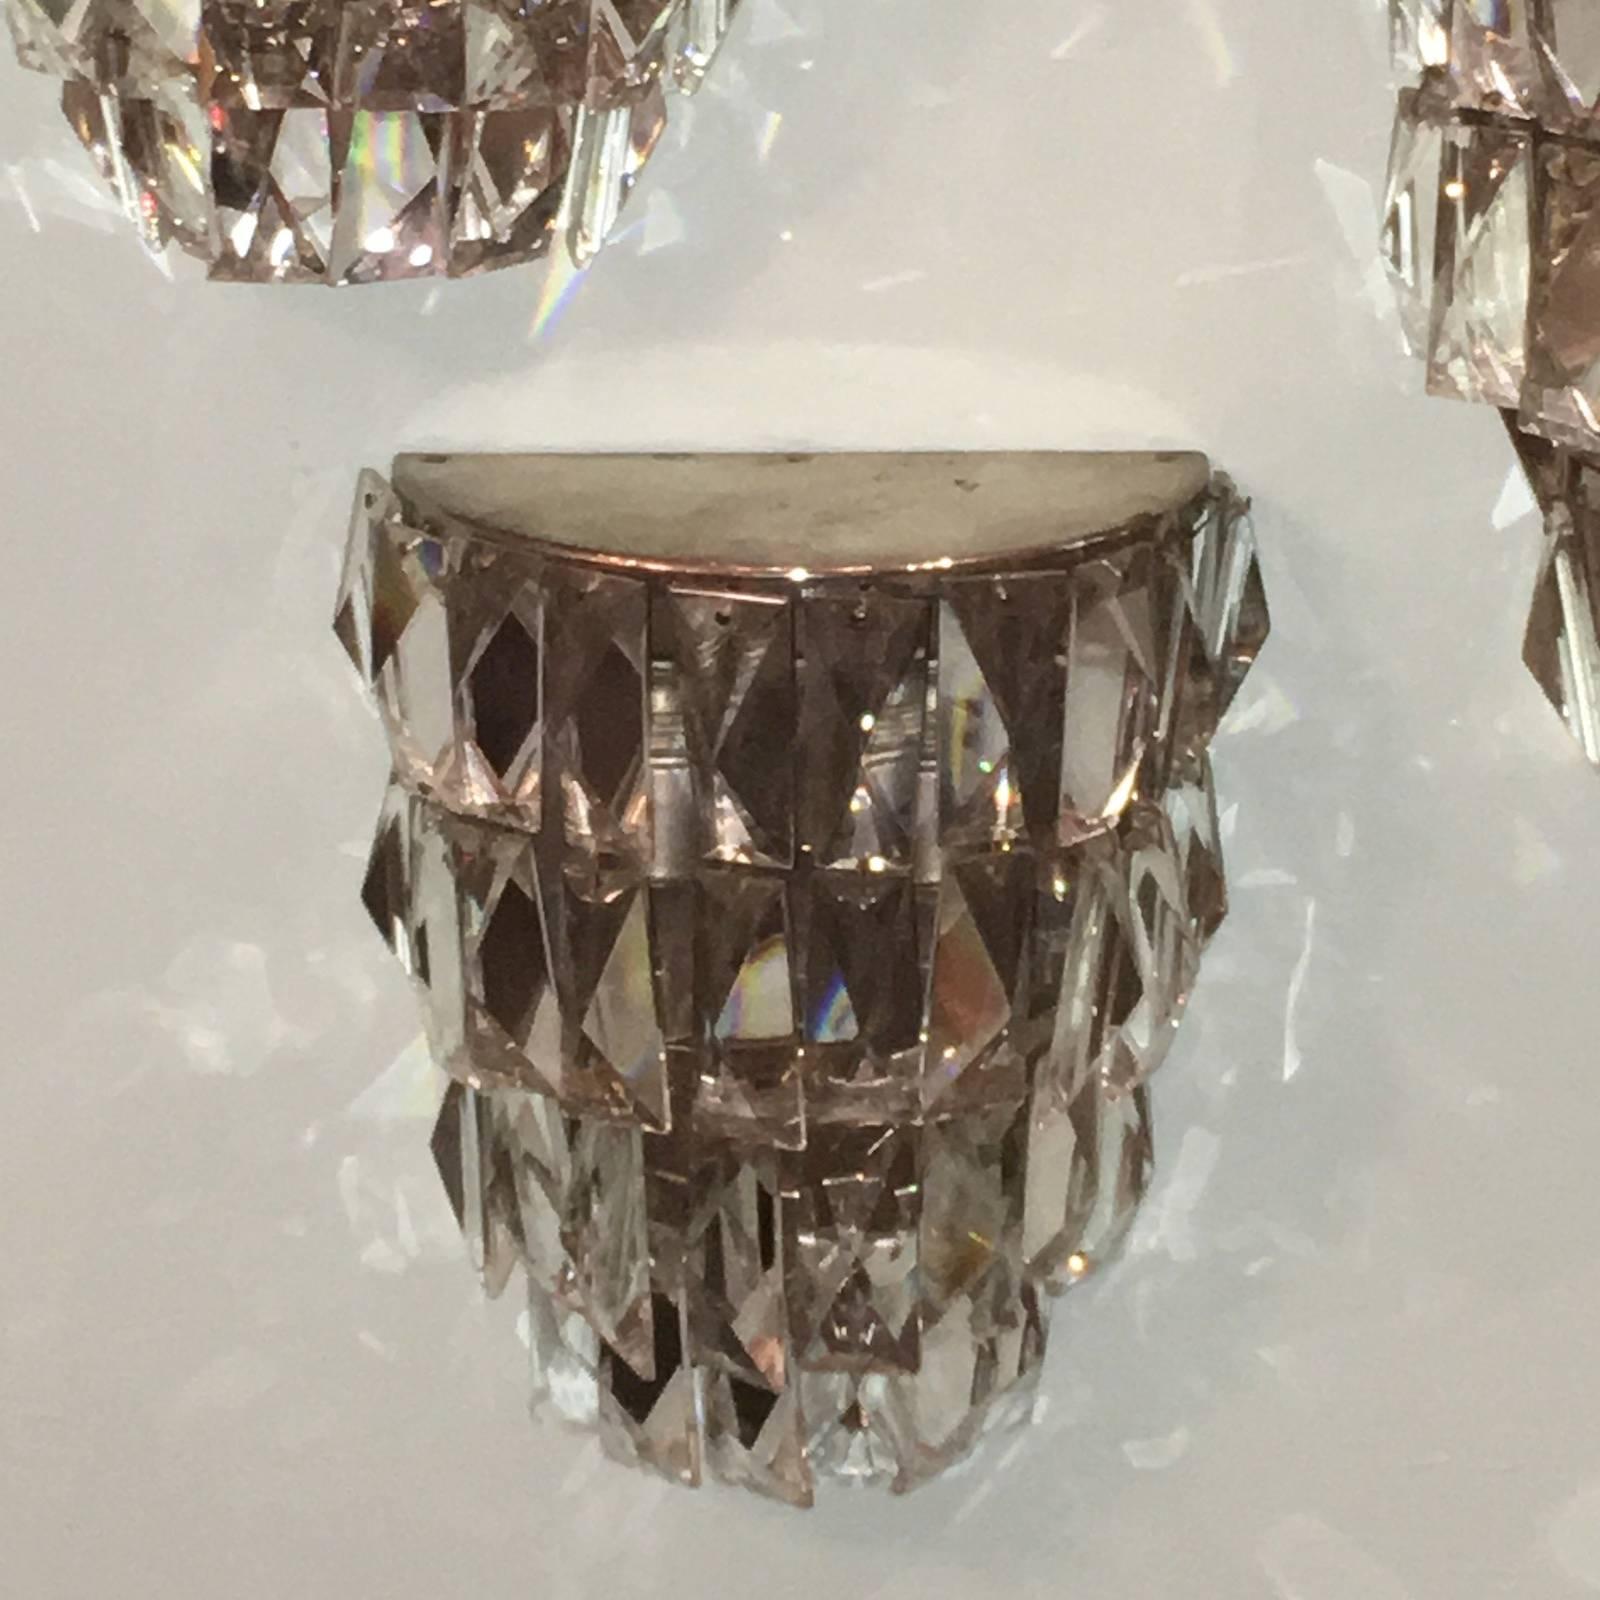 Lot of 4 sconces with 34 individual faceted crystals hanging on a chrome armature. Each fixture requires two European E 14 candelabra bulbs up to 40 watts each.